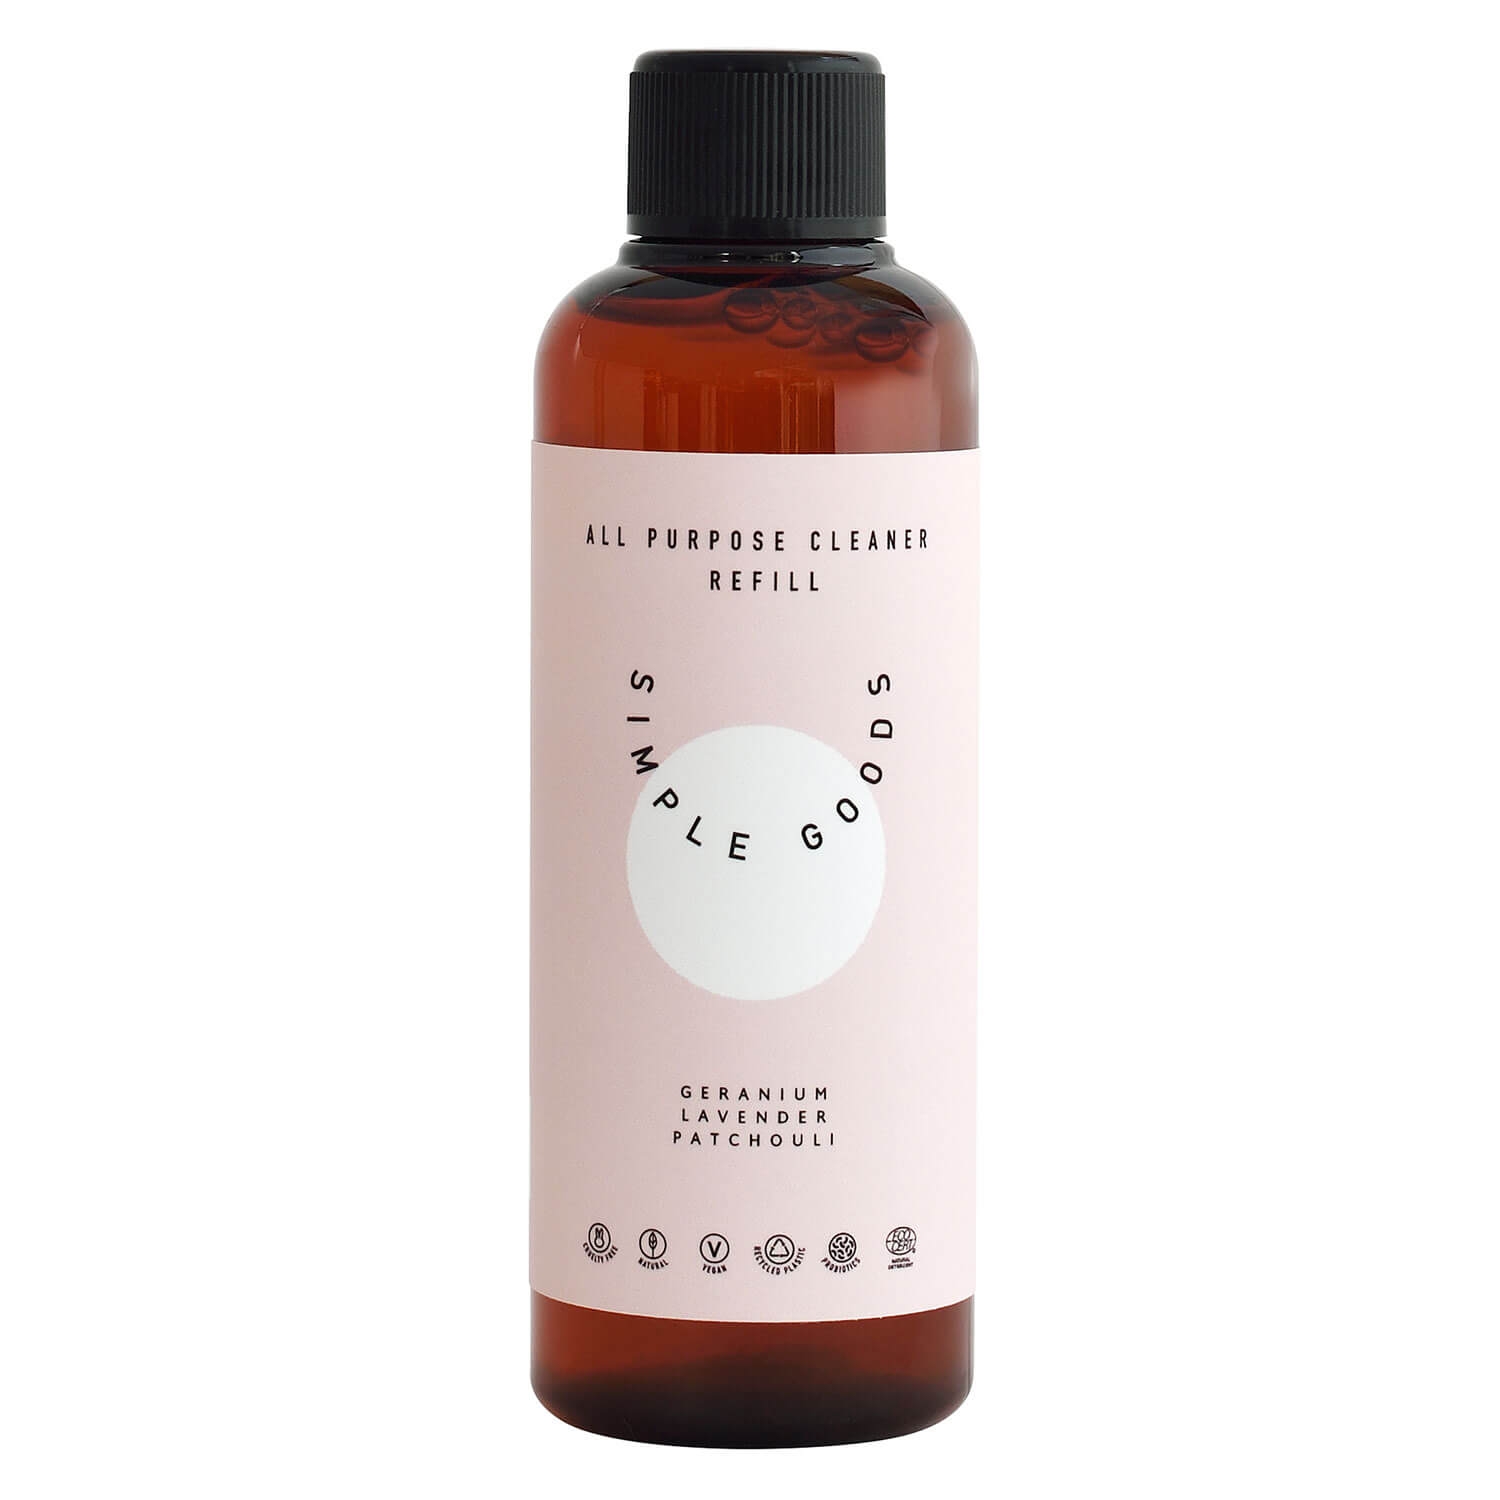 Product image from SIMPLE GOODS - Refill All Purpose Cleaner Geranium, Lavender, Patchouli